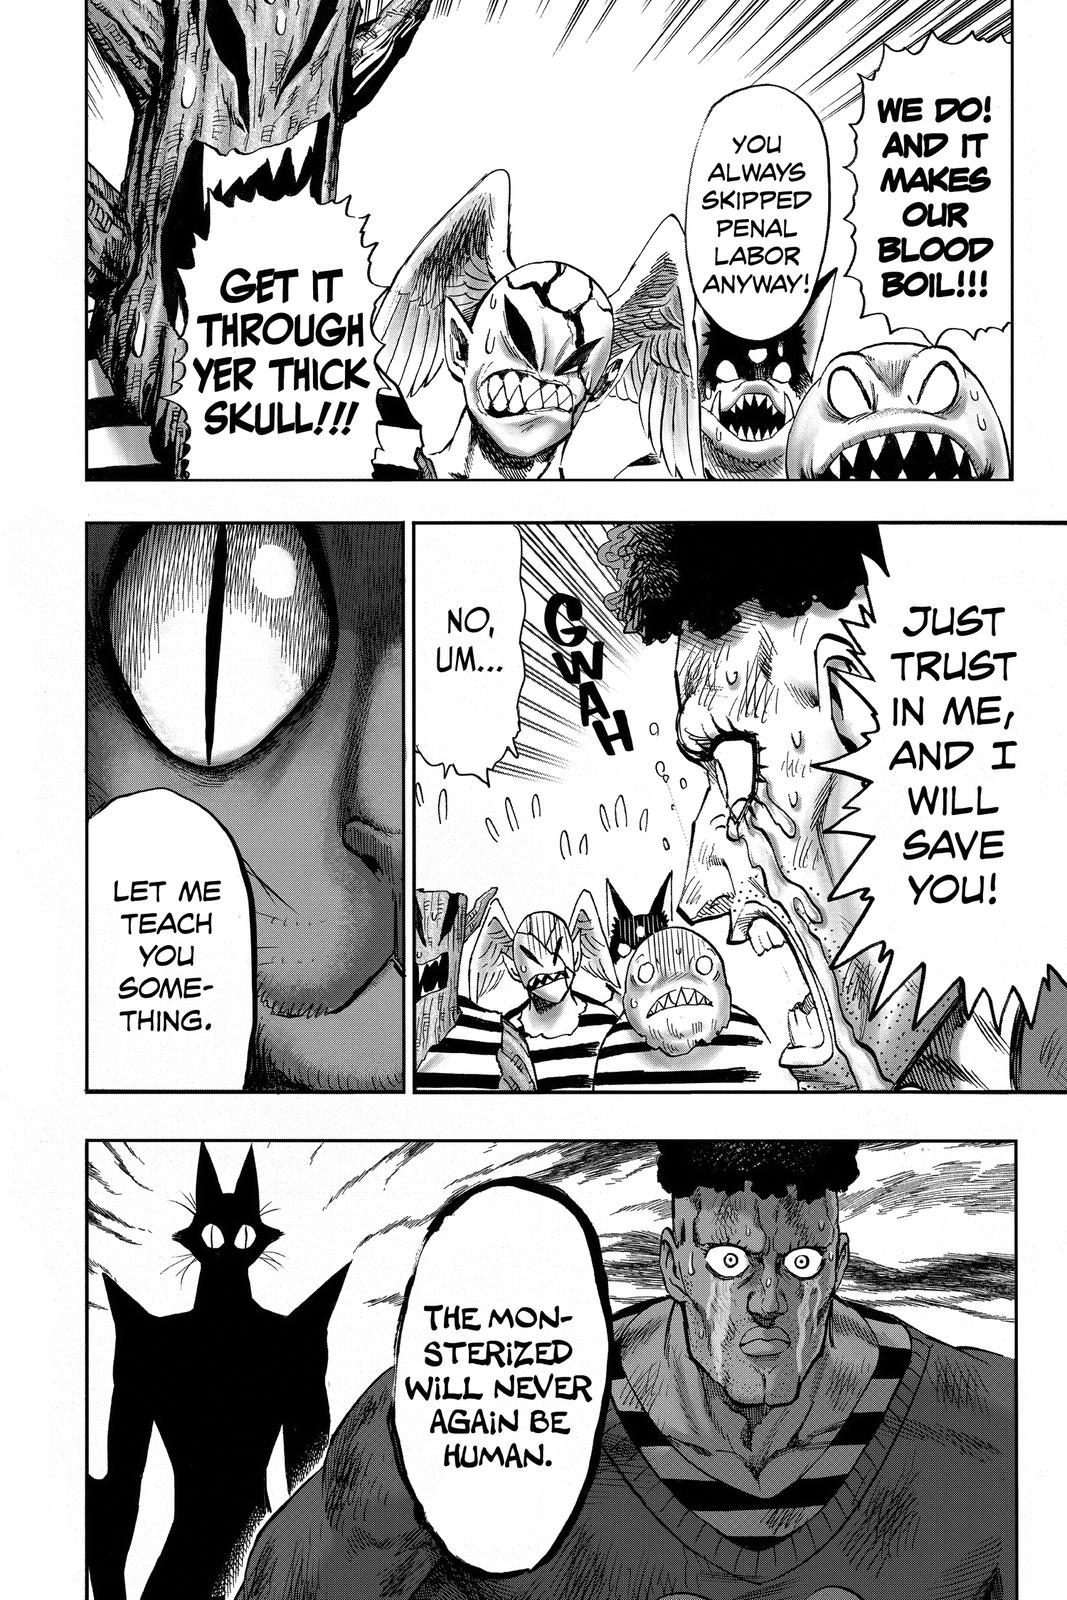 One-Punch Man, Punch 110 image 25